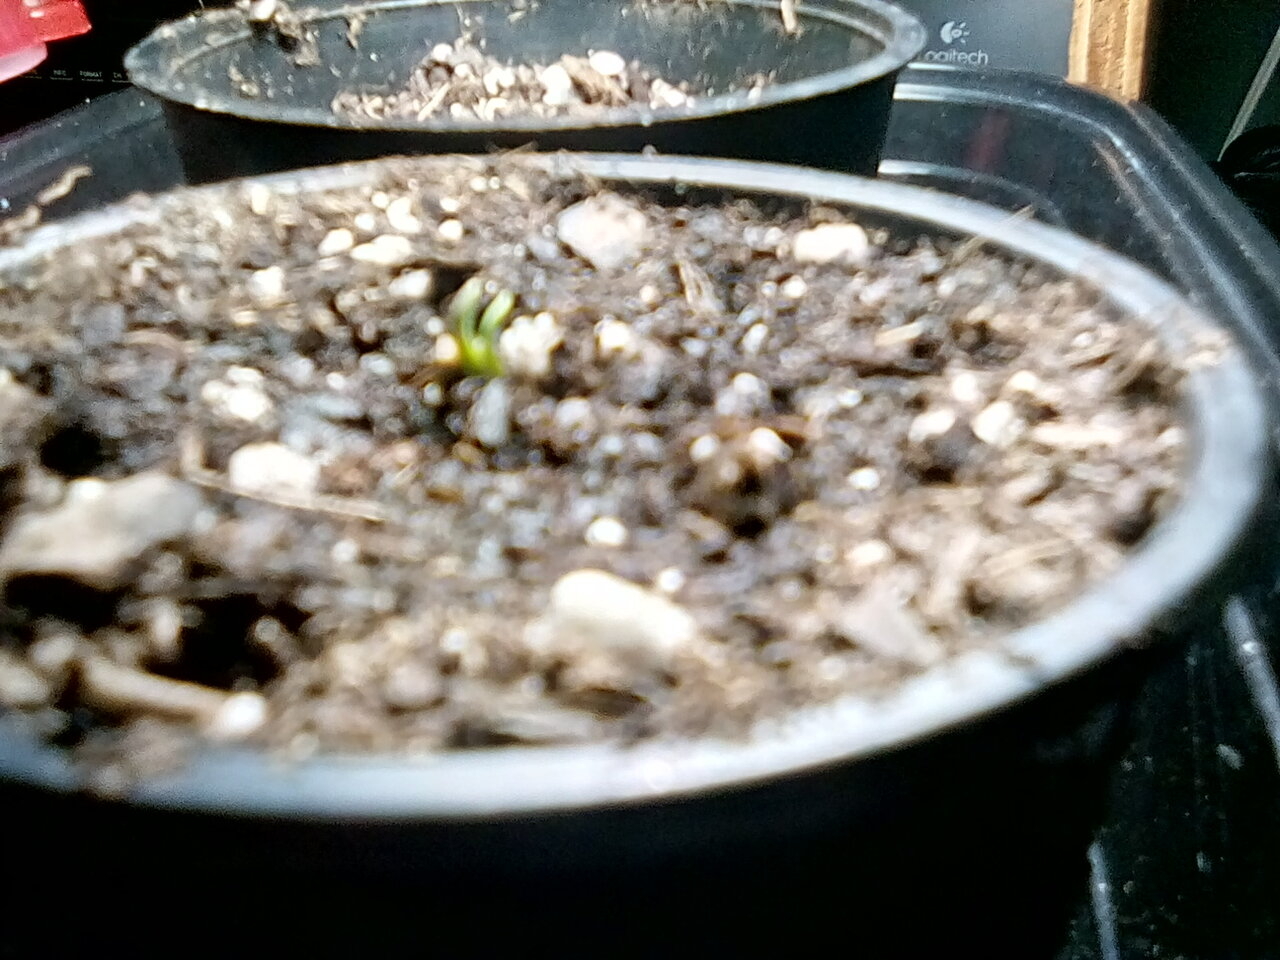 Come on little one you can do it come on.Day one Fruity pebbles fem seed.